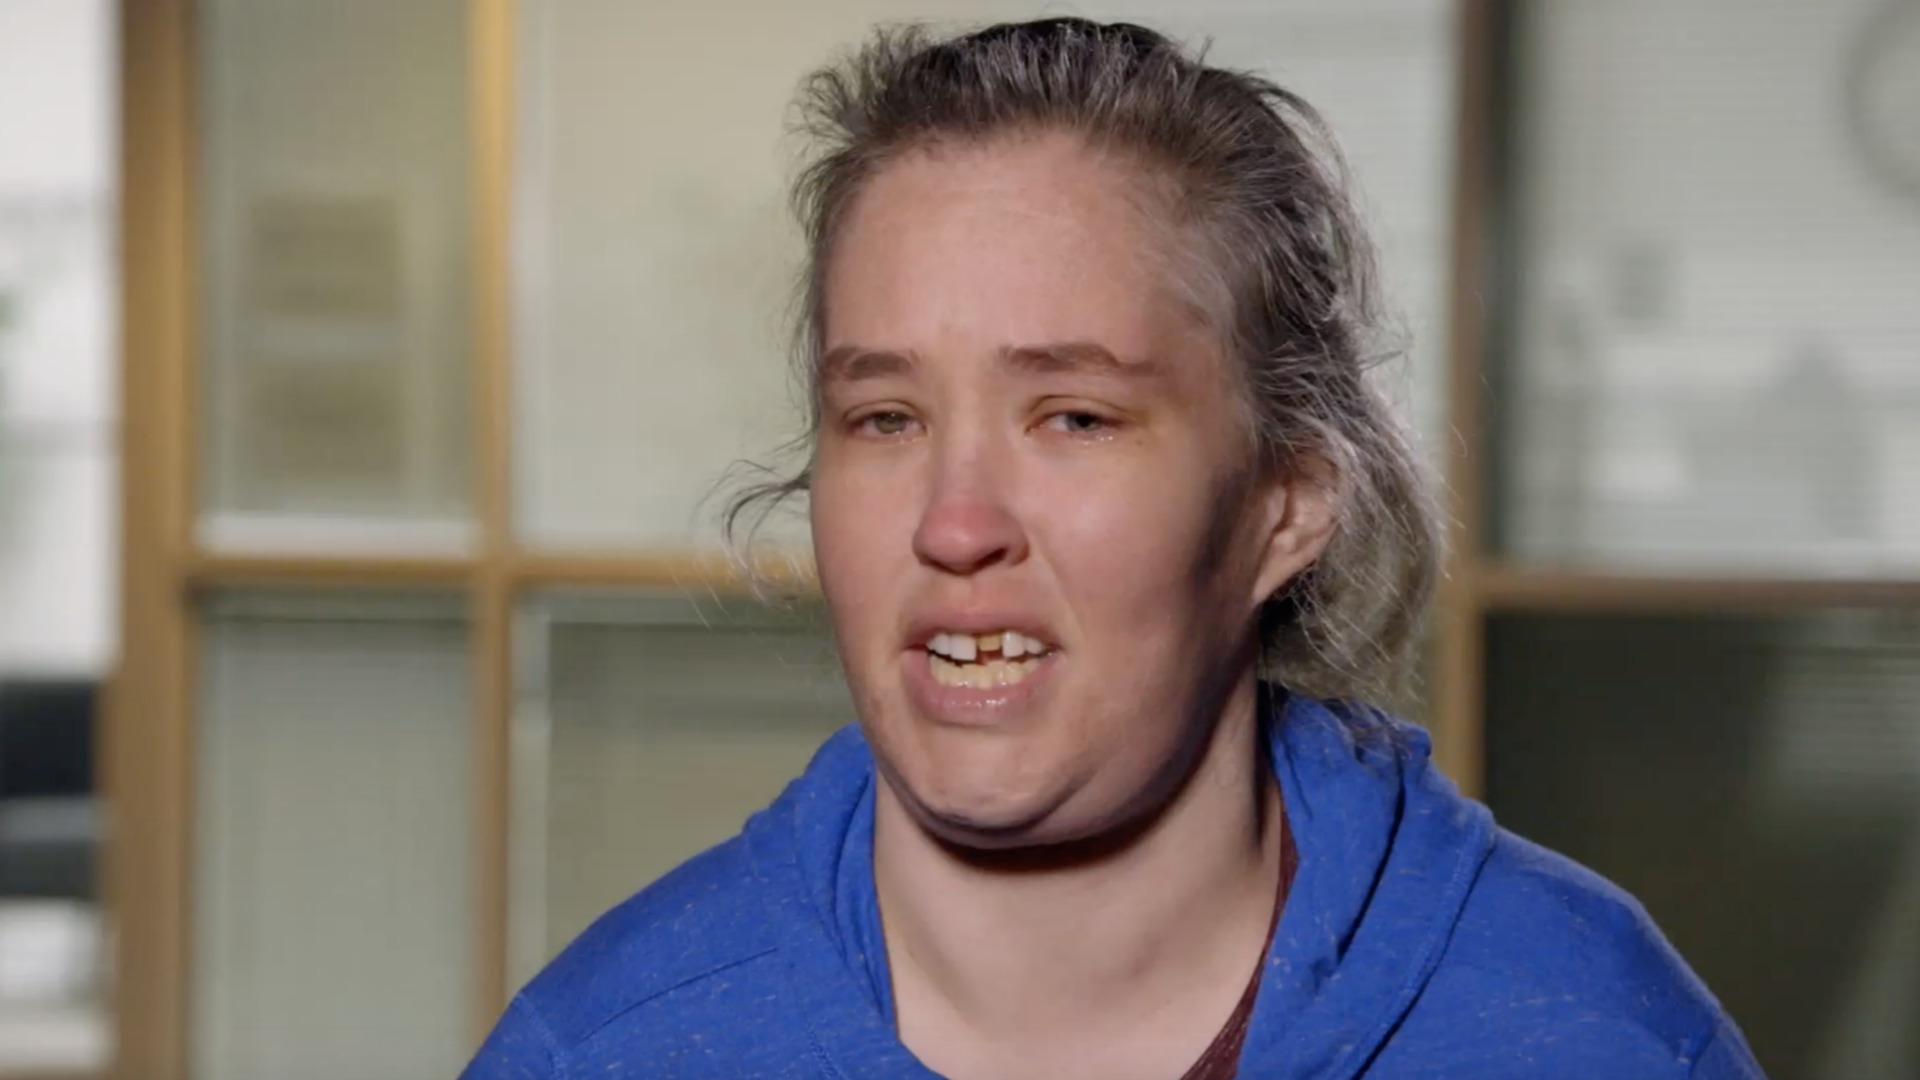 Watch Sneak Peek: We're Going Behind the Headlines | Mama June: From Not to Hot Video Extras